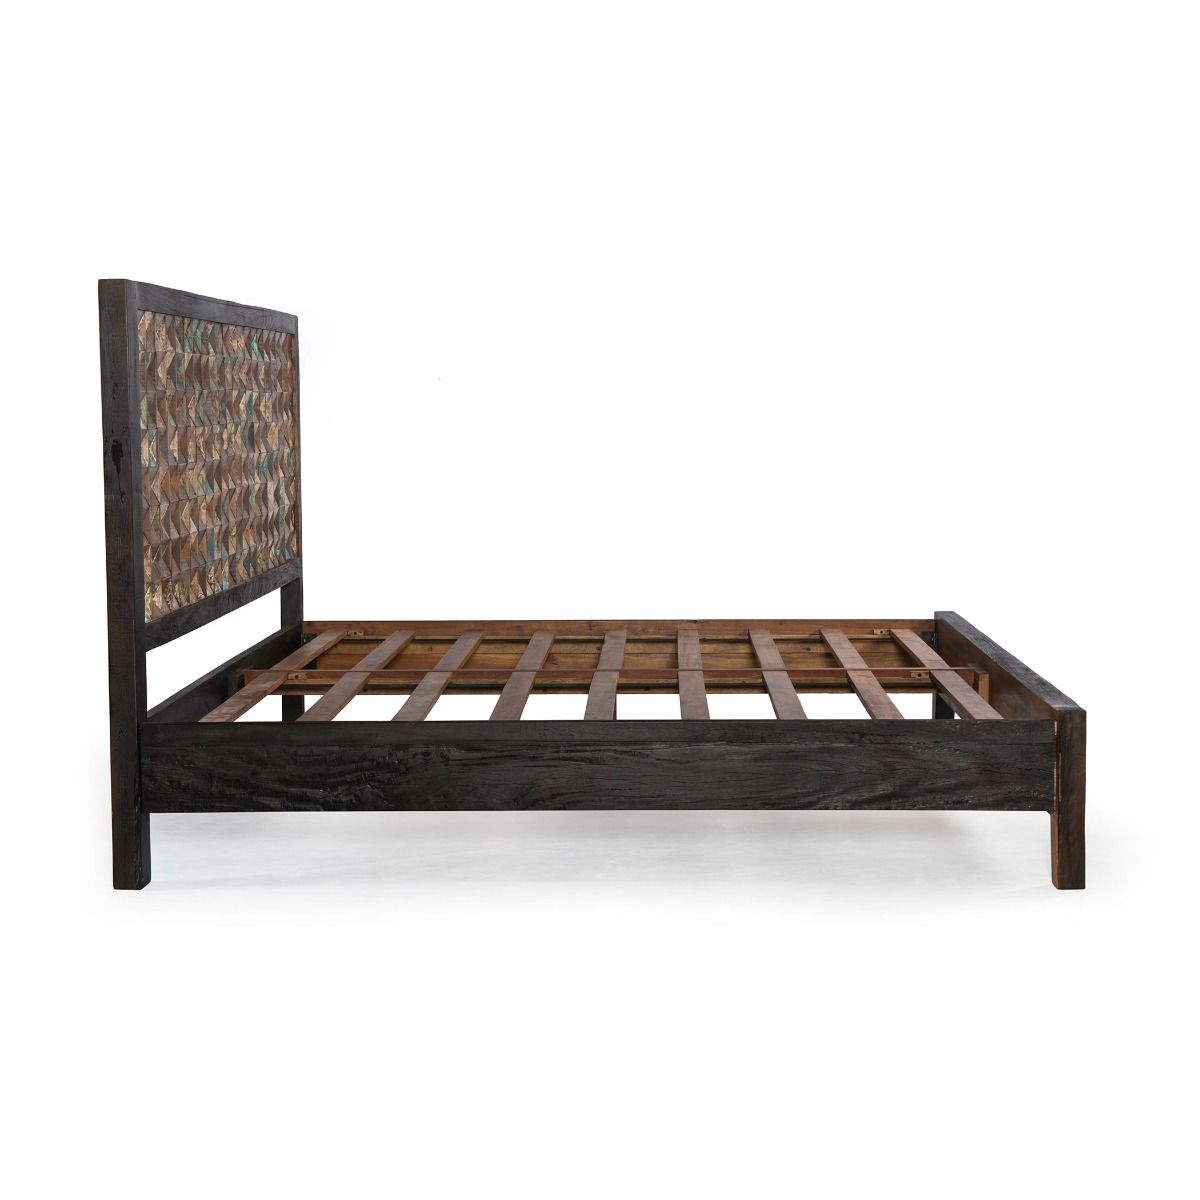 Rio Carved Teak Wood Queen Bed